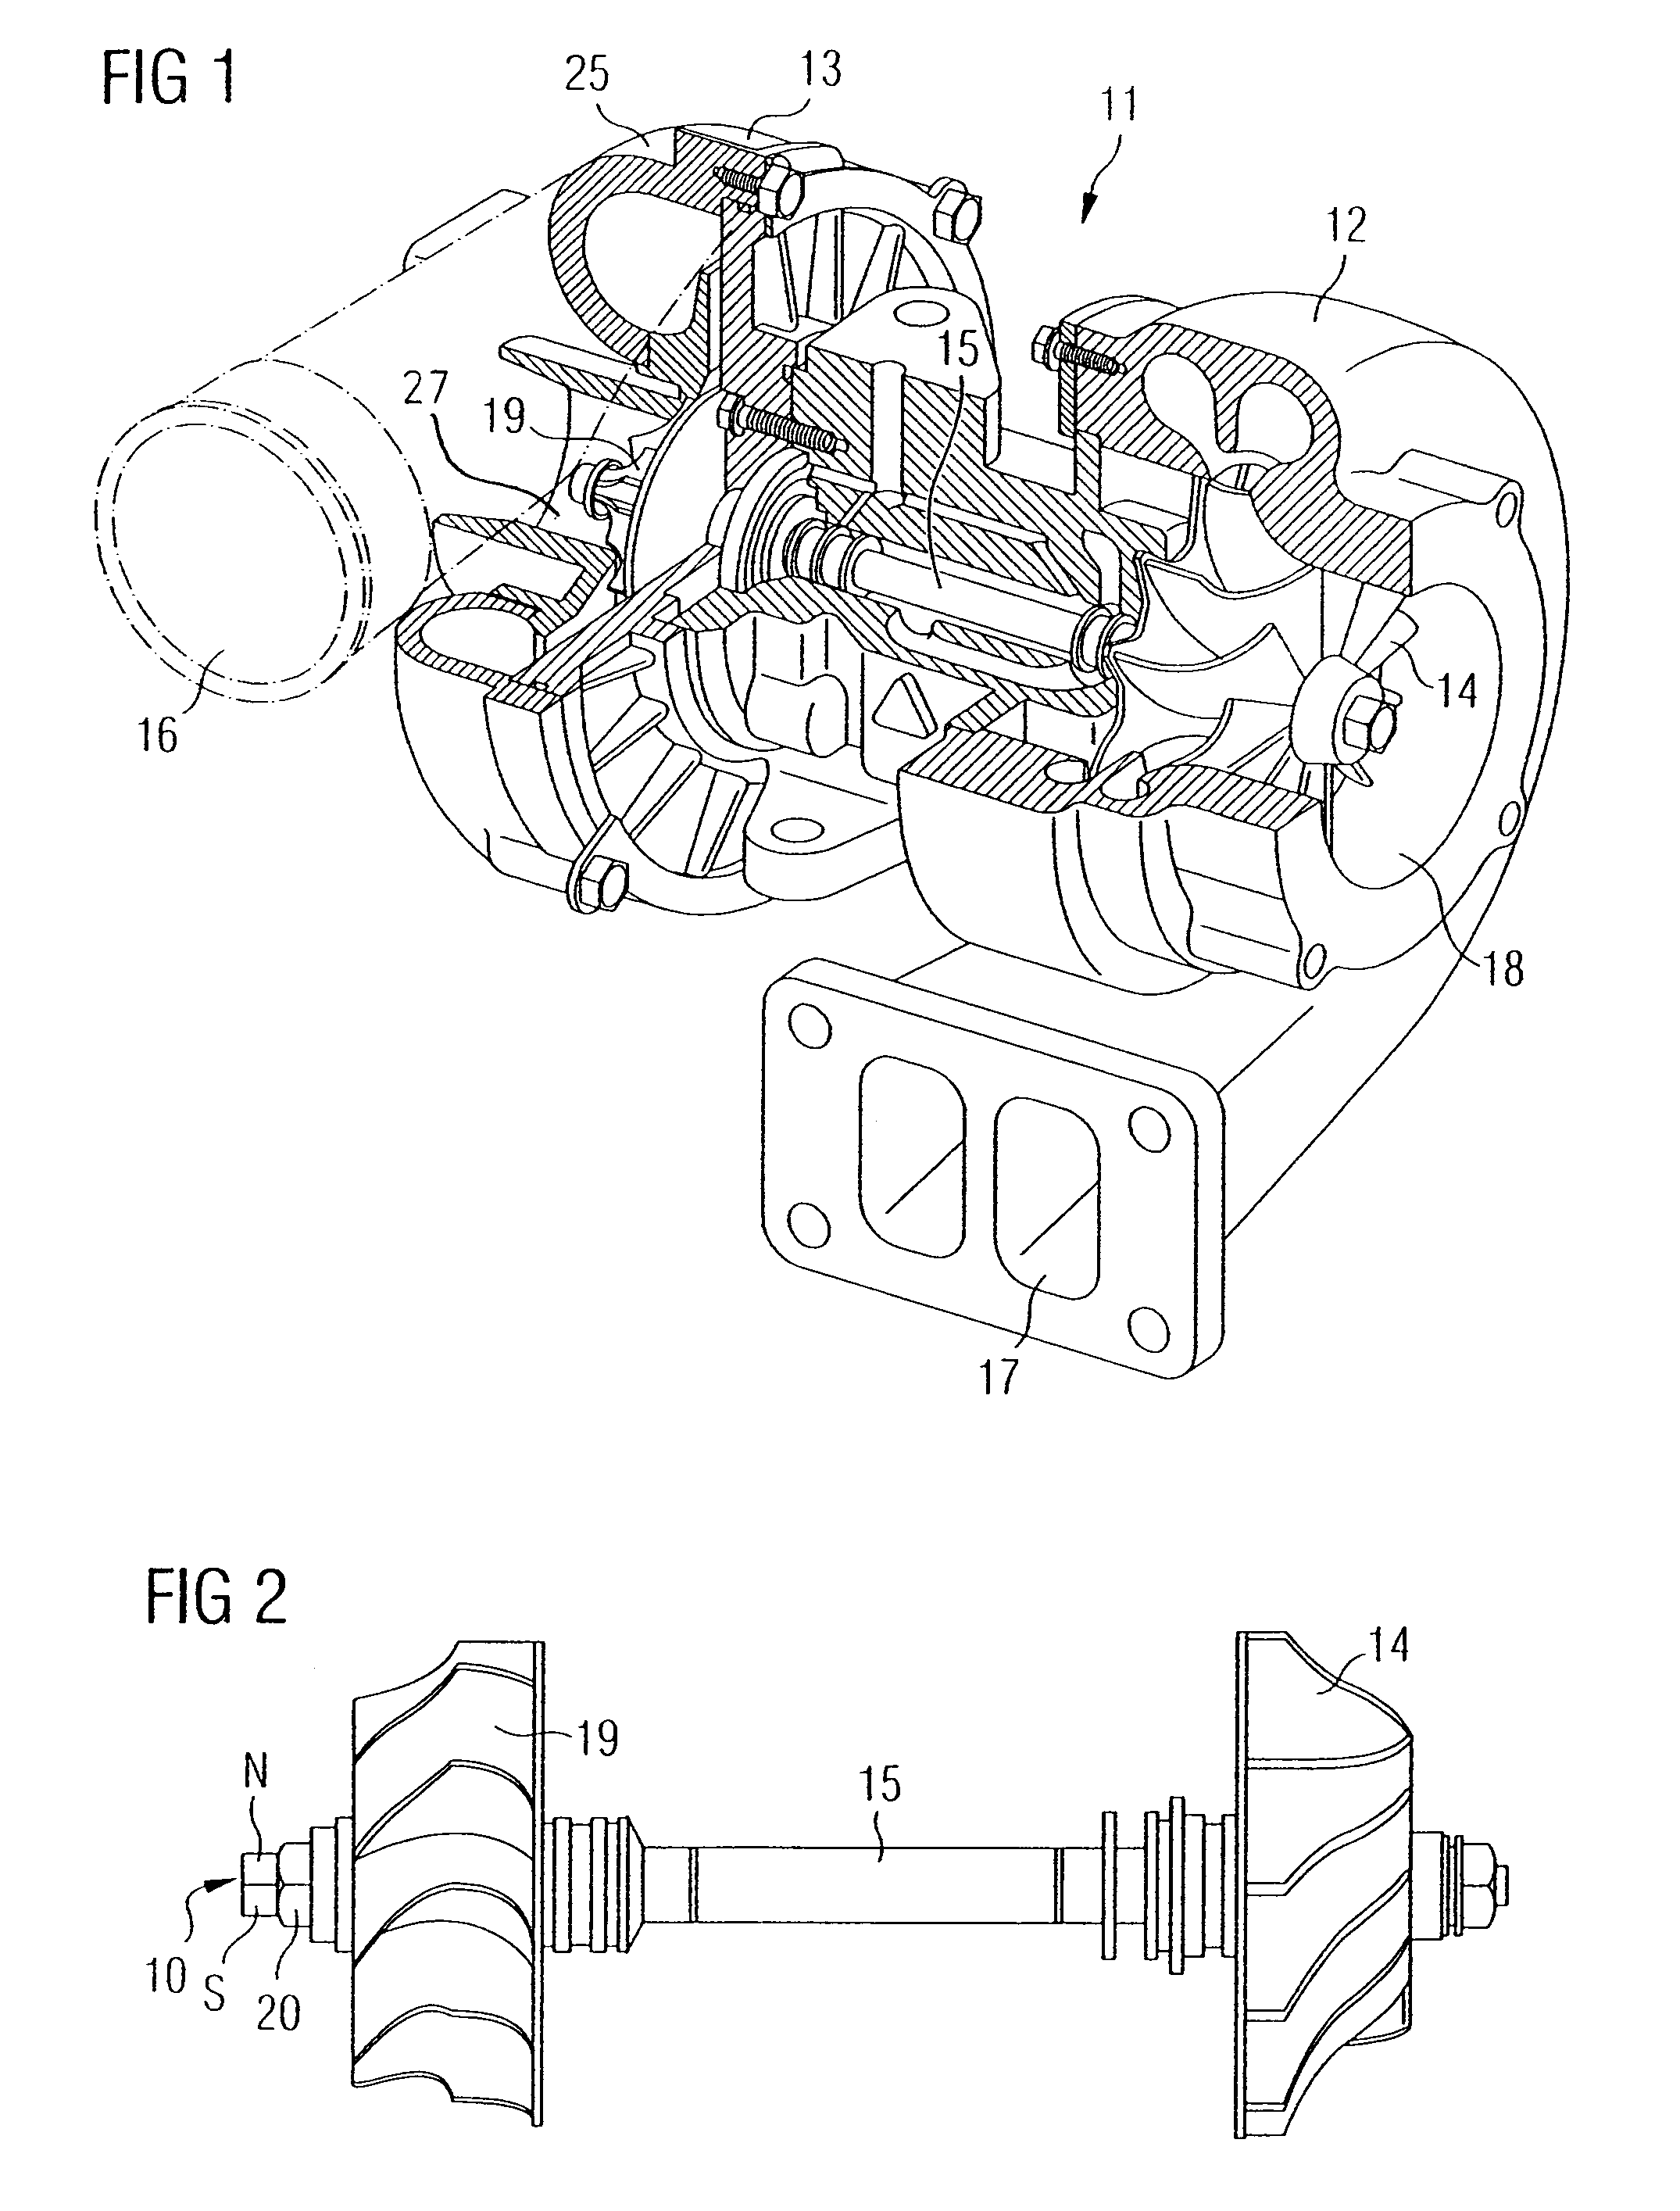 Magnetic field sensor for measuring the rotational speed of a turboshaft